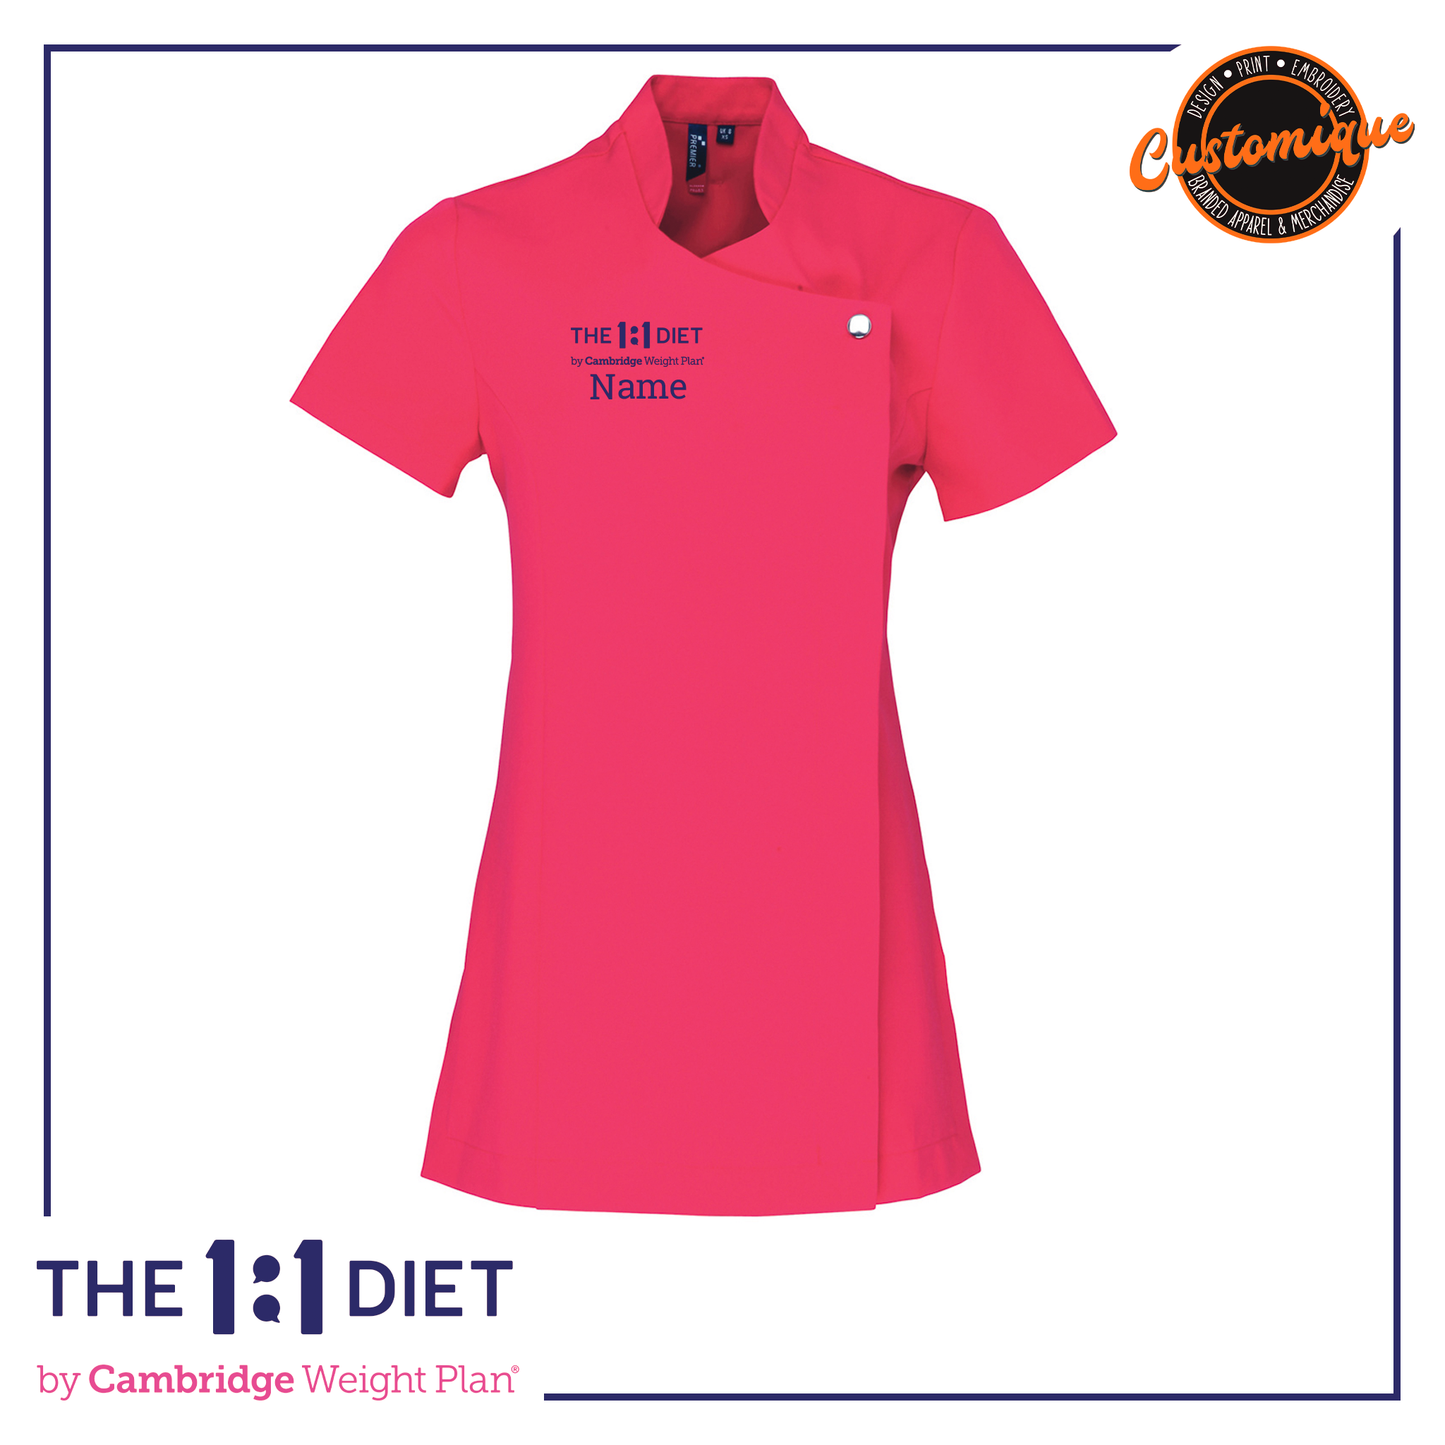 The 1:1 Diet - Beauty & Spa Tunic